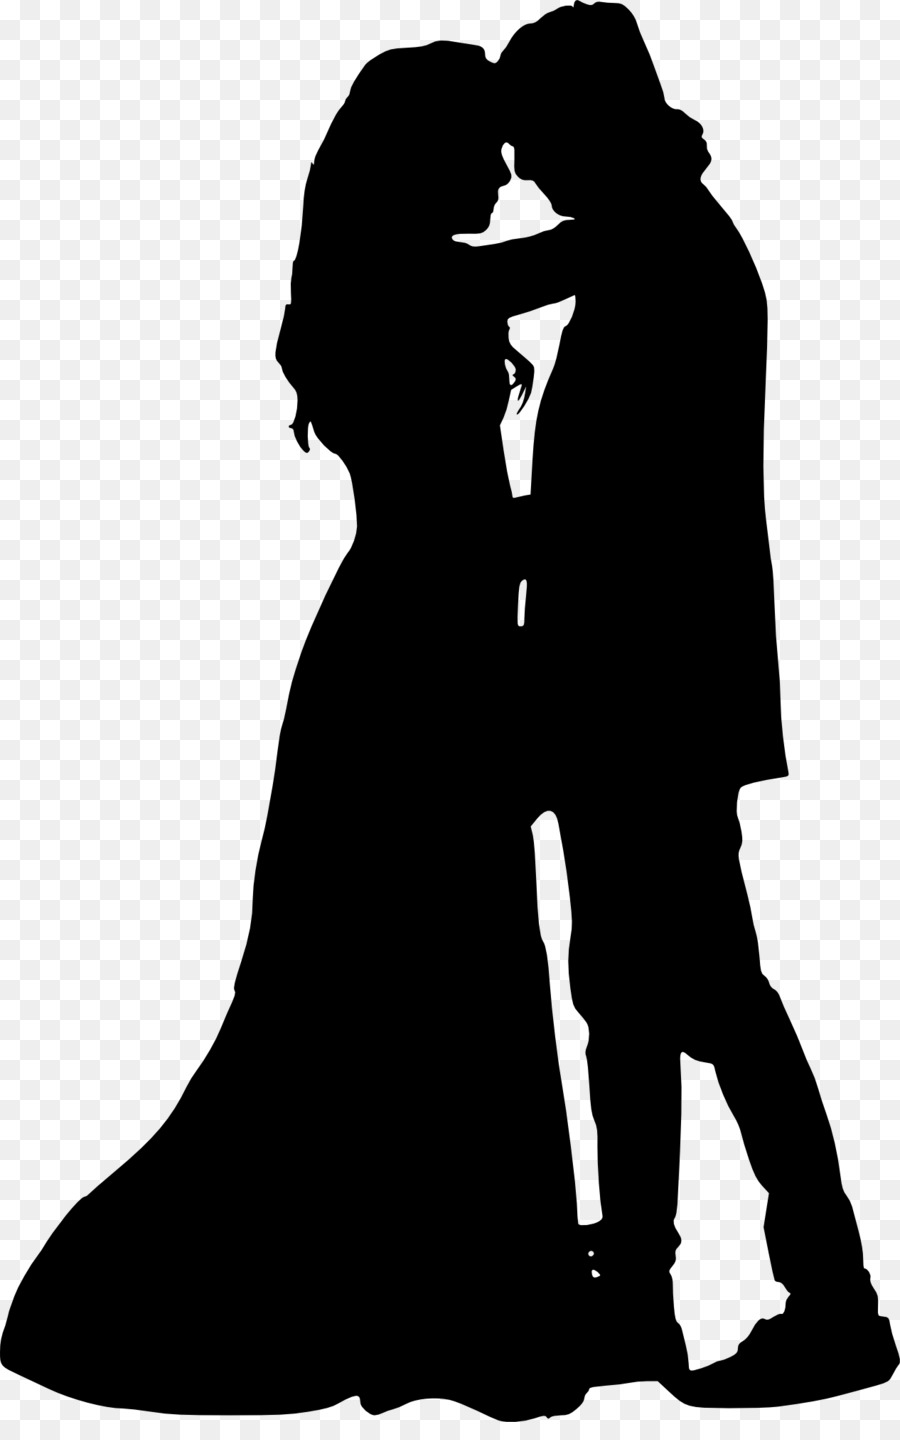 Silhouette Woman Drawing Bridegroom Clip art - couple silhouette png download - 1266*2000 - Free Transparent Silhouette png Download.